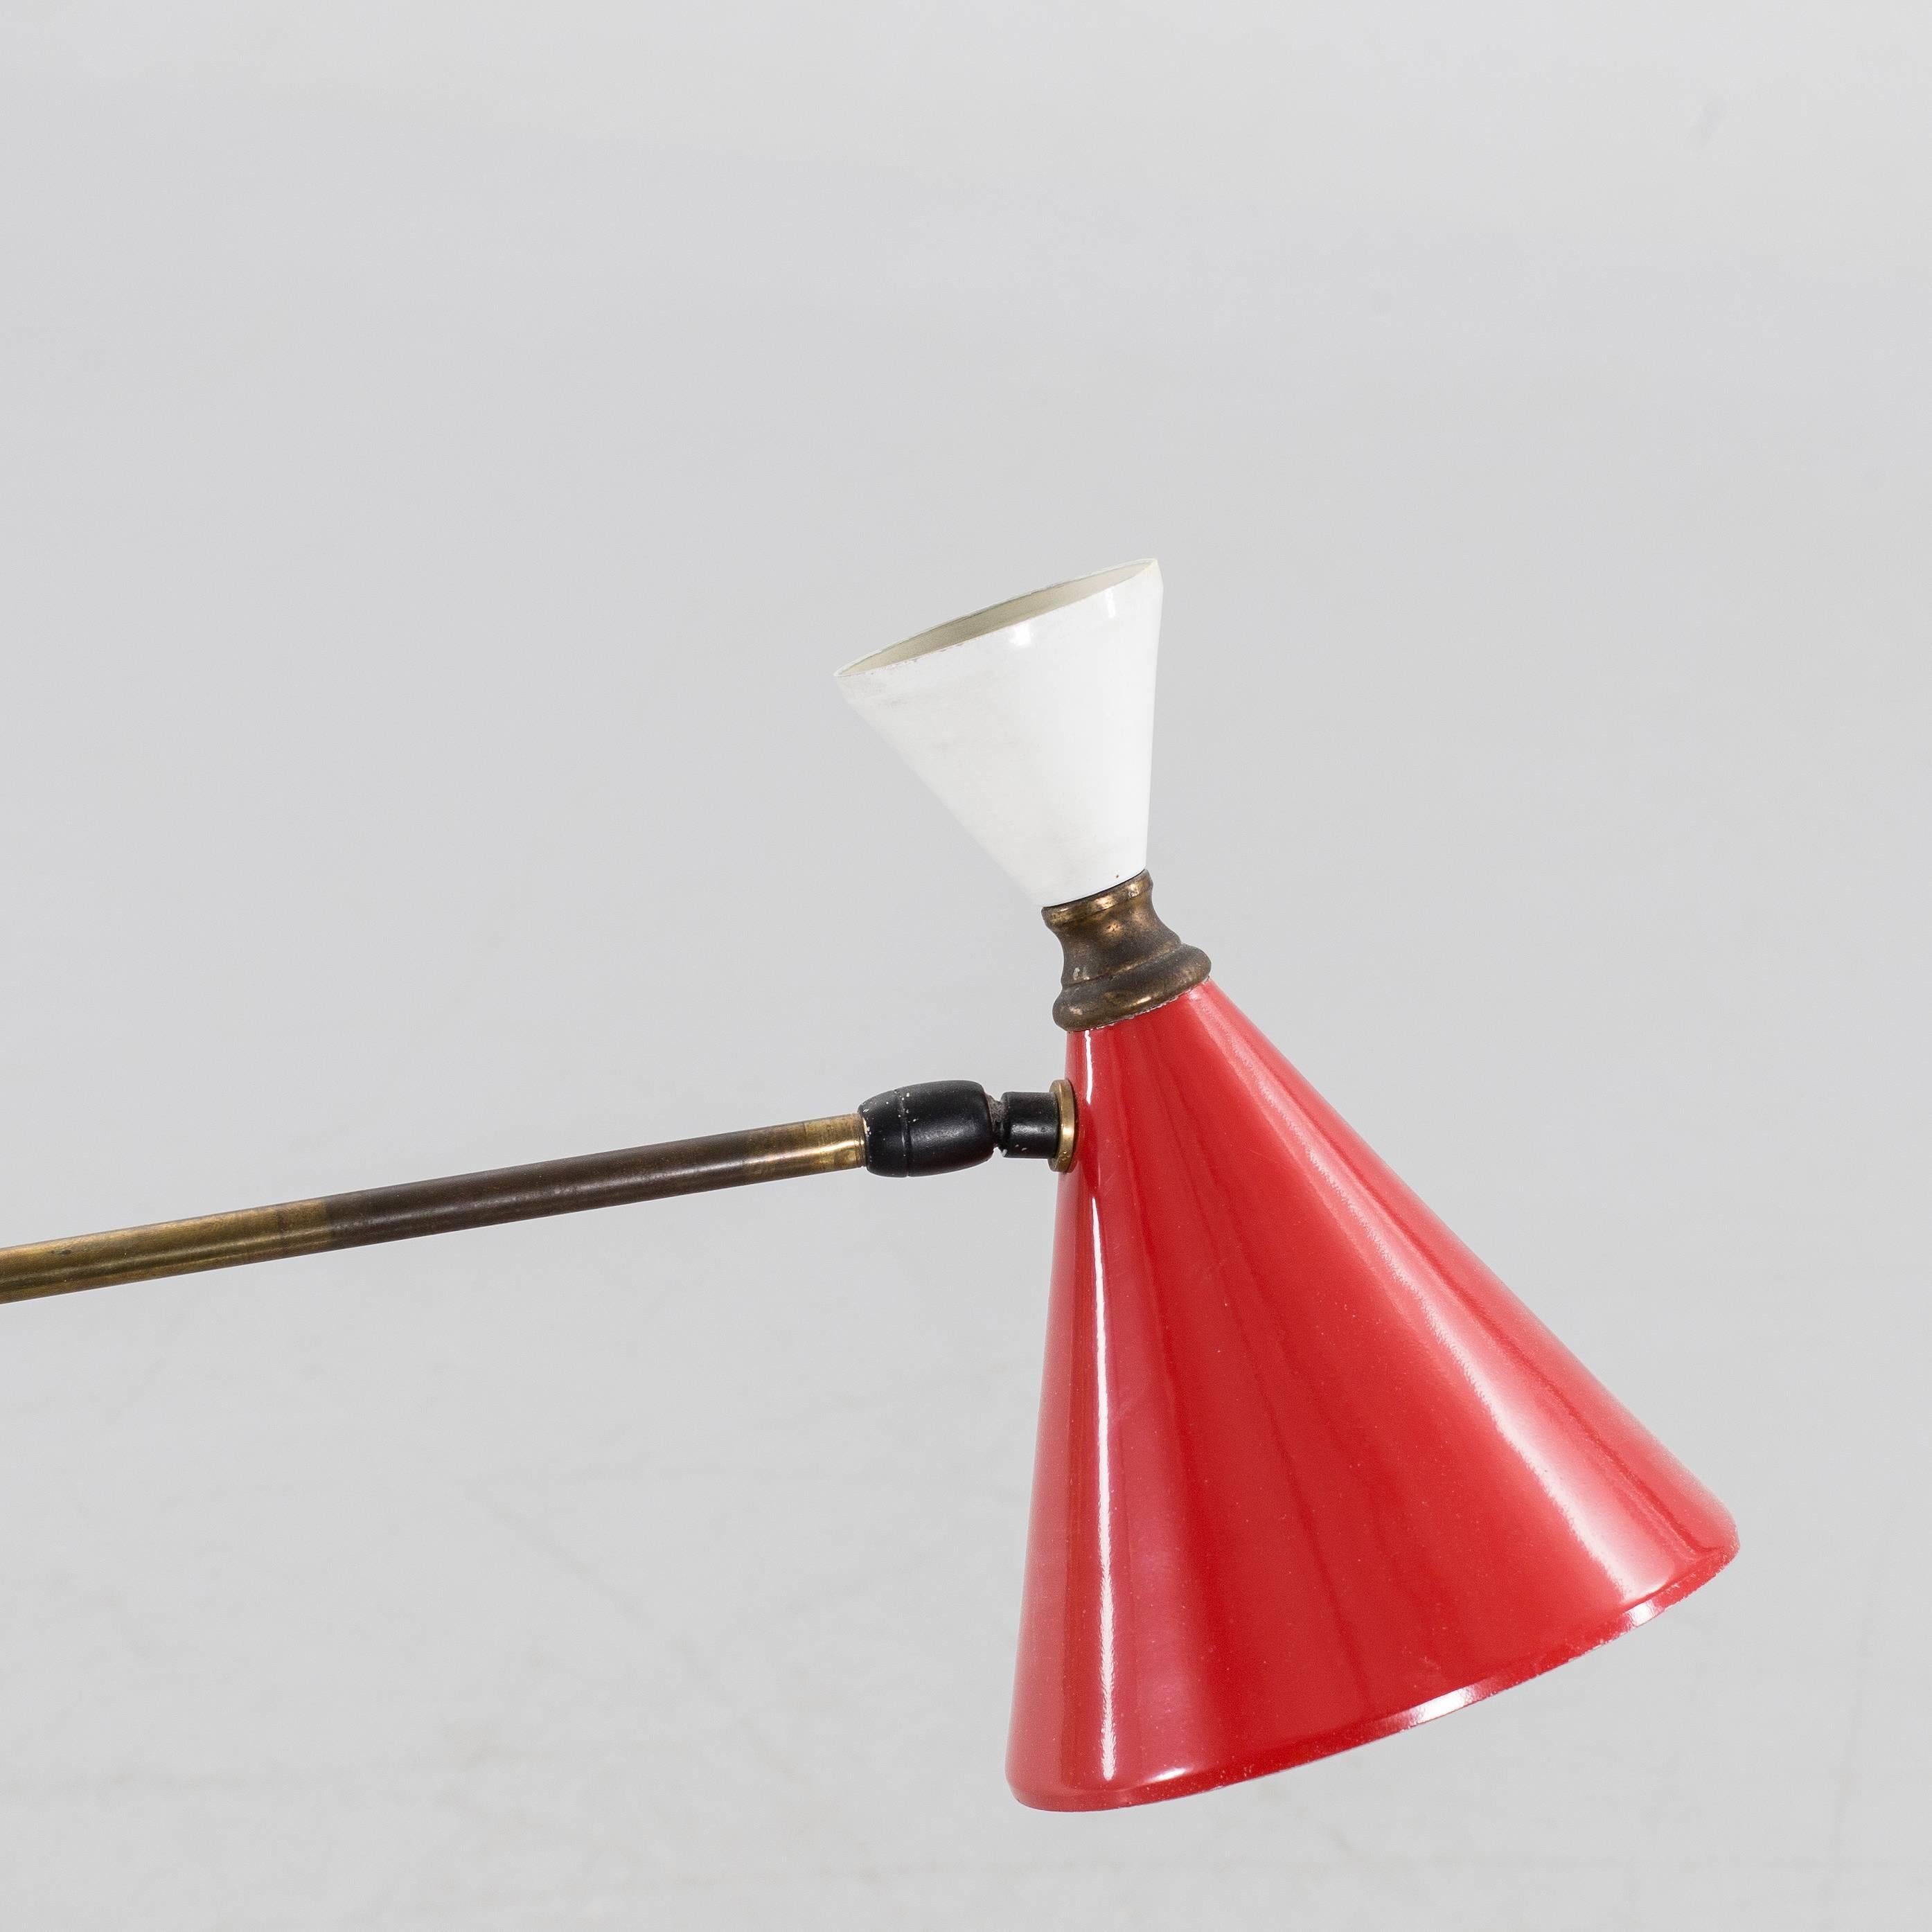 Italian mid-20th Century handmade floor lamp. Base in stone, brass articulated arm, red and white lacquered metal shade.